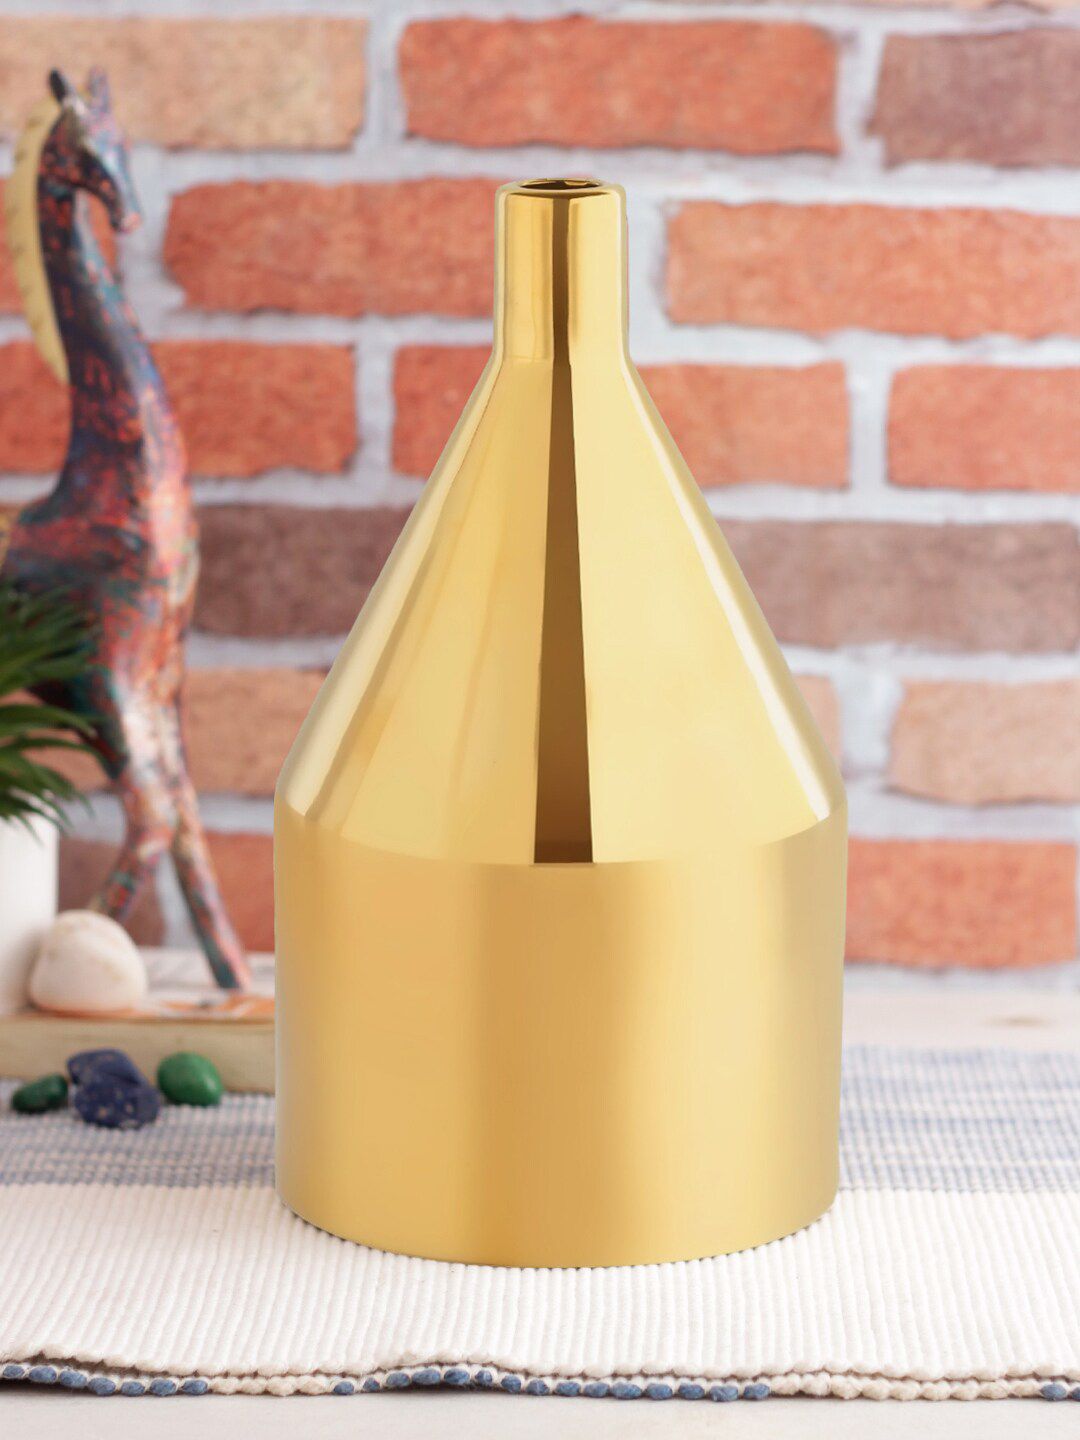 TAYHAA Gold-Toned Solid Ceramic Flower Vase Price in India